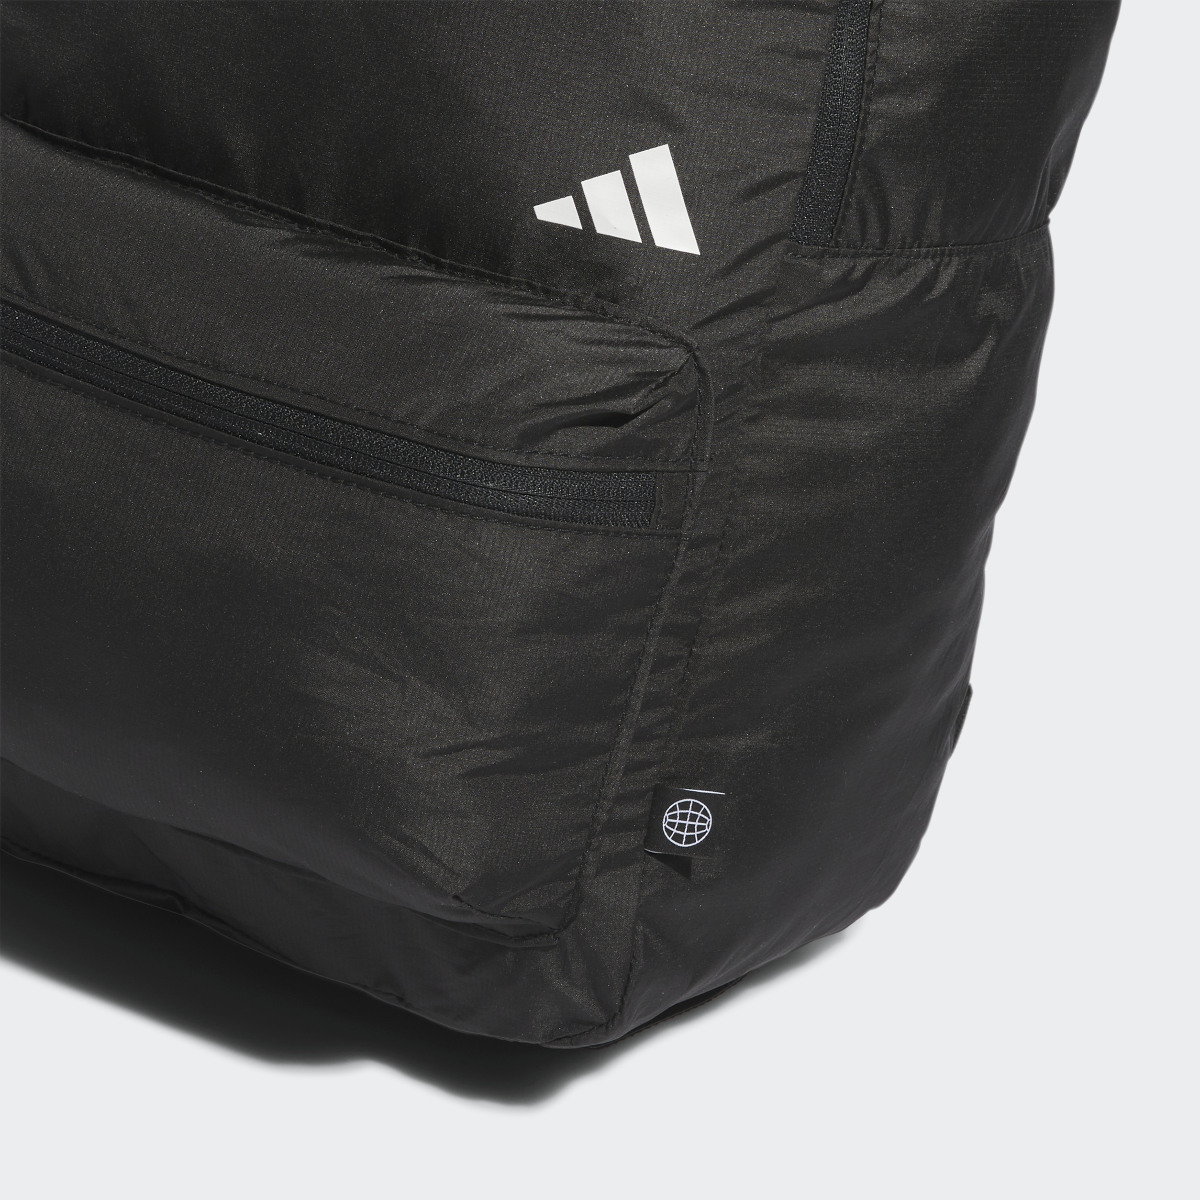 Adidas Golf Packable Backpack. 6